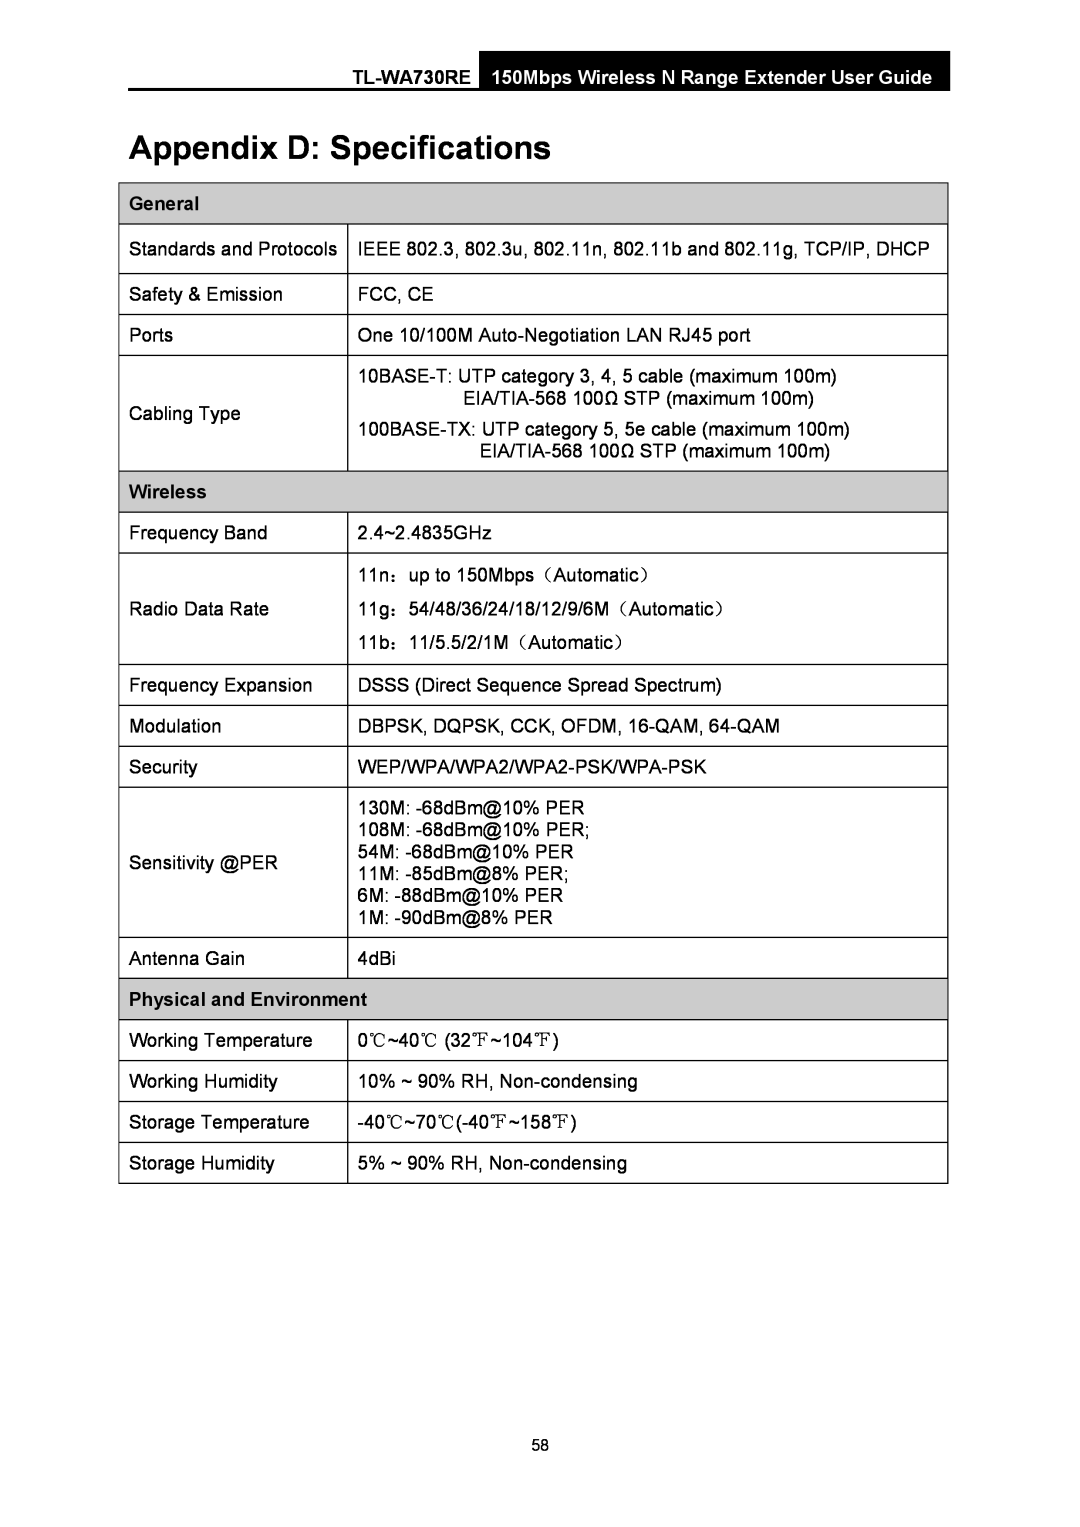 TP-Link TL-WA730RE manual Appendix D Specifications, General, Wireless, Physical and Environment 